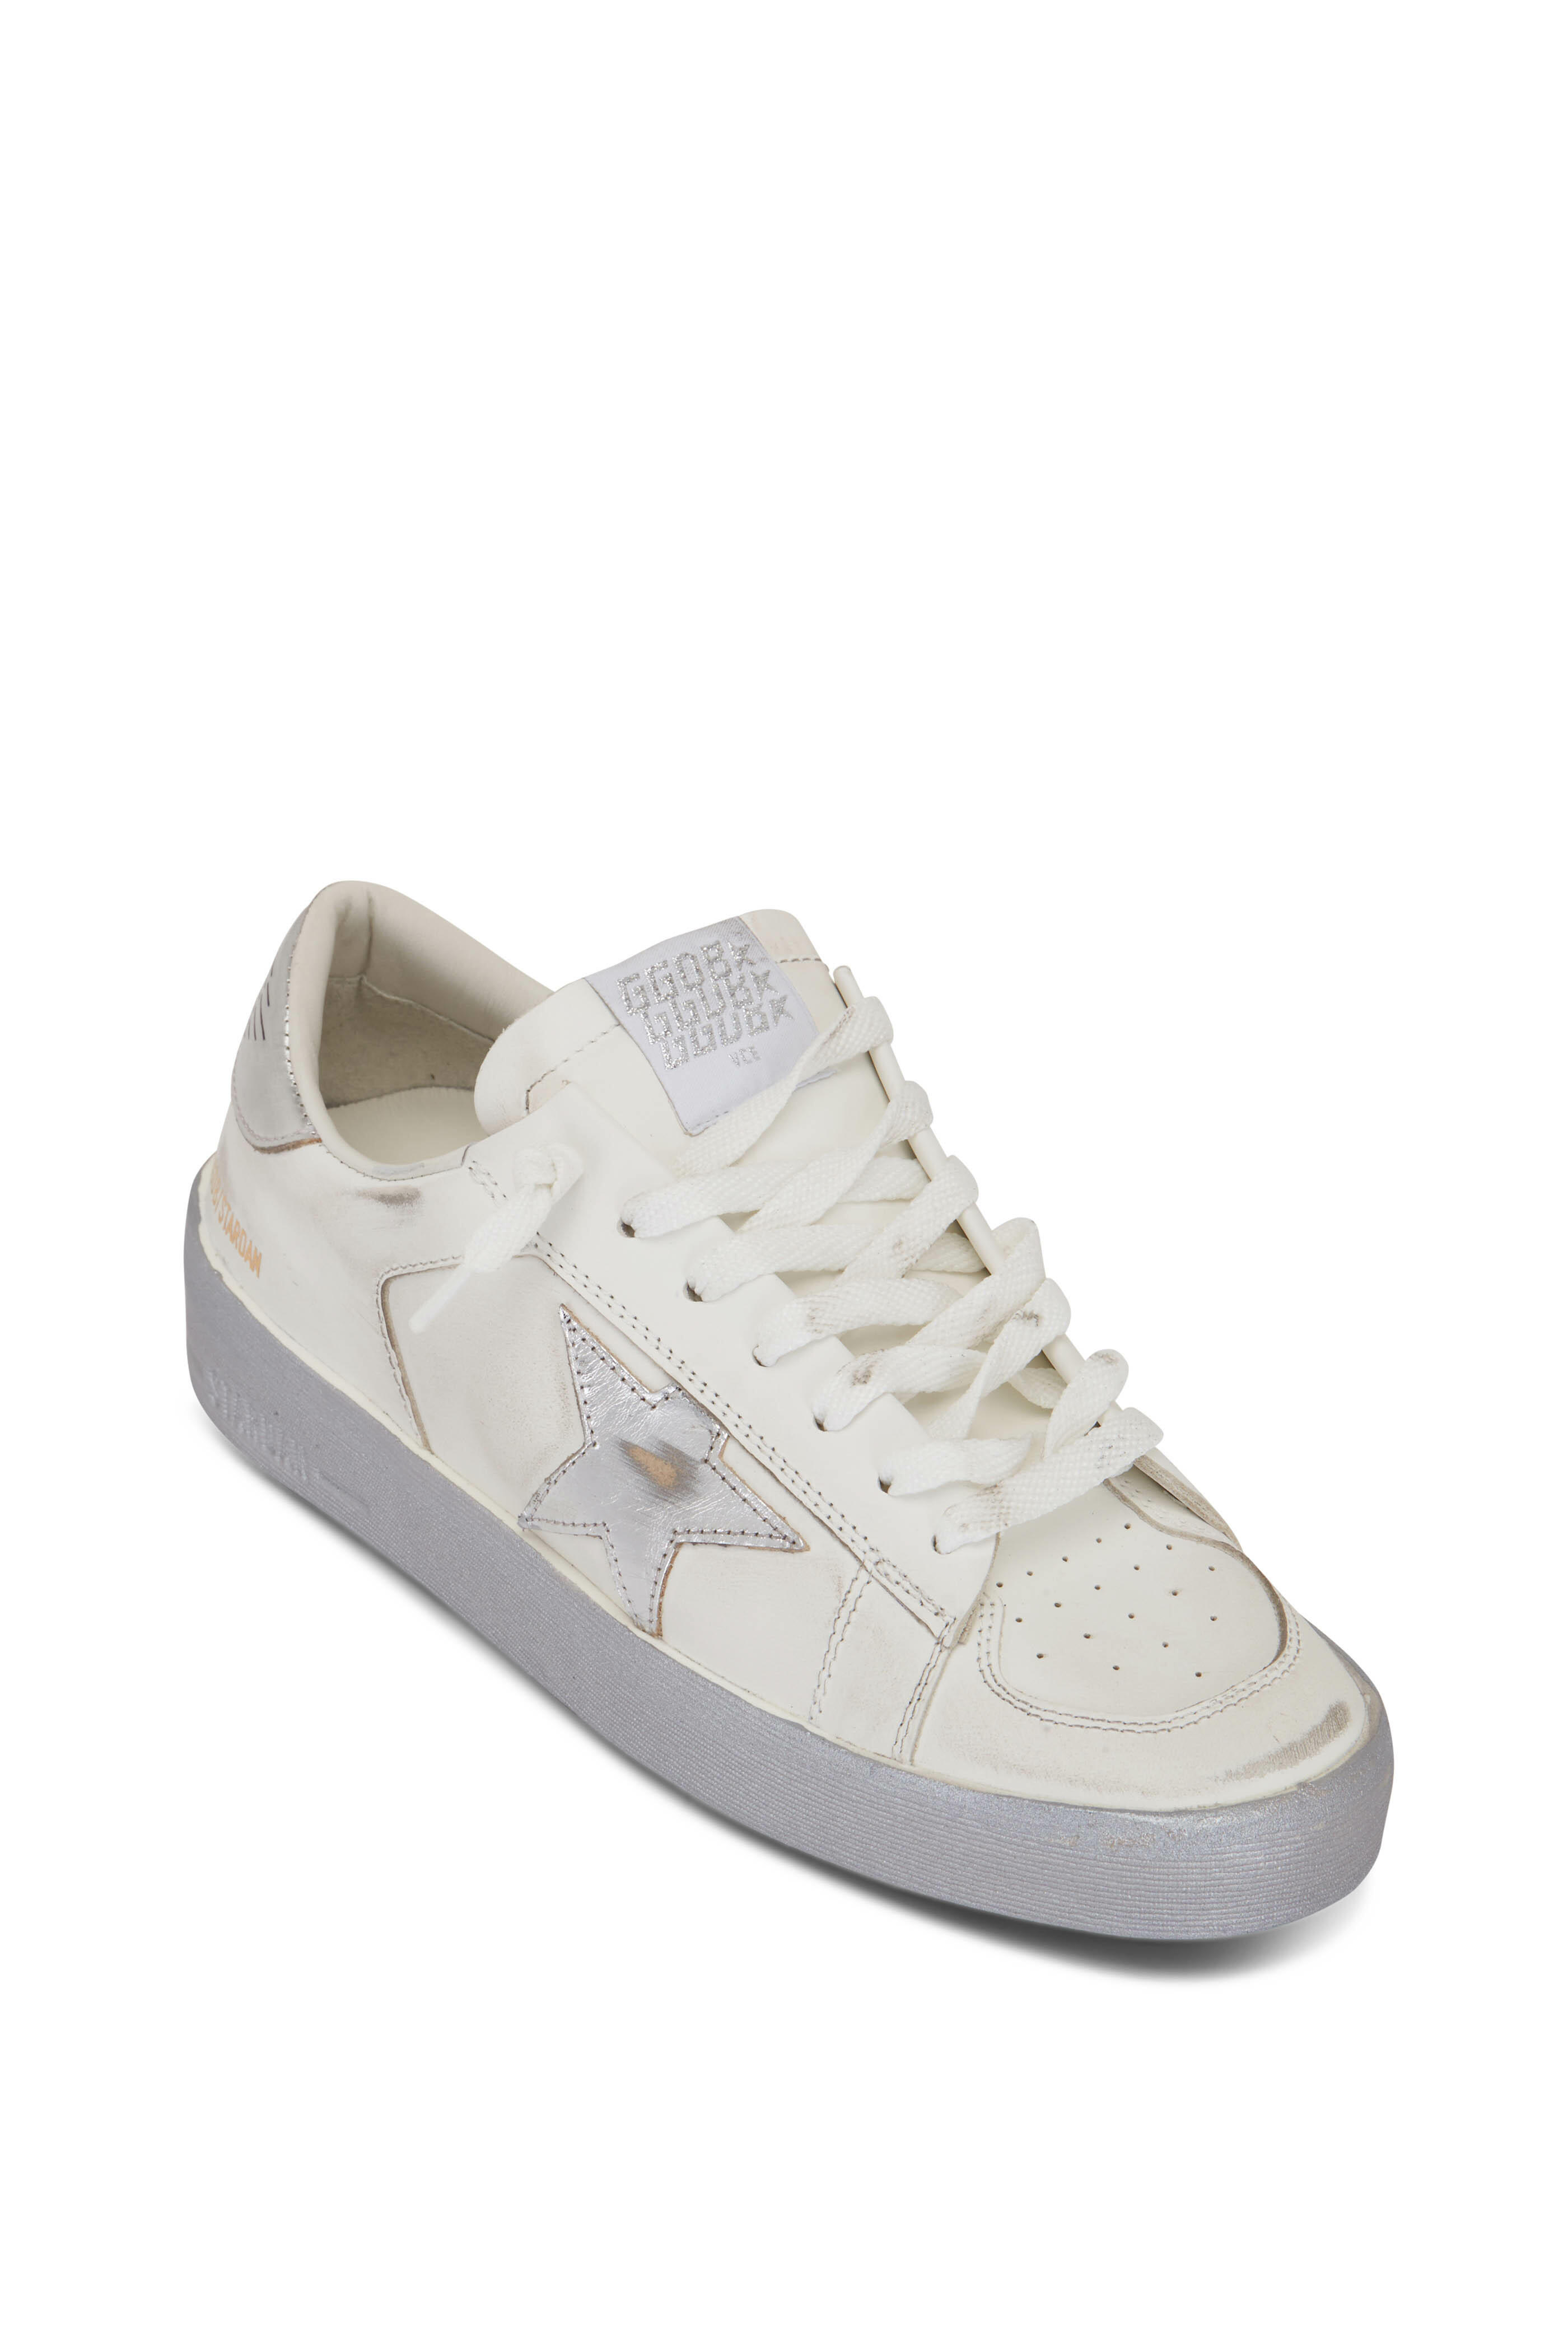 Golden Goose - Stardan Silver & White Leather Low Top Sneaker